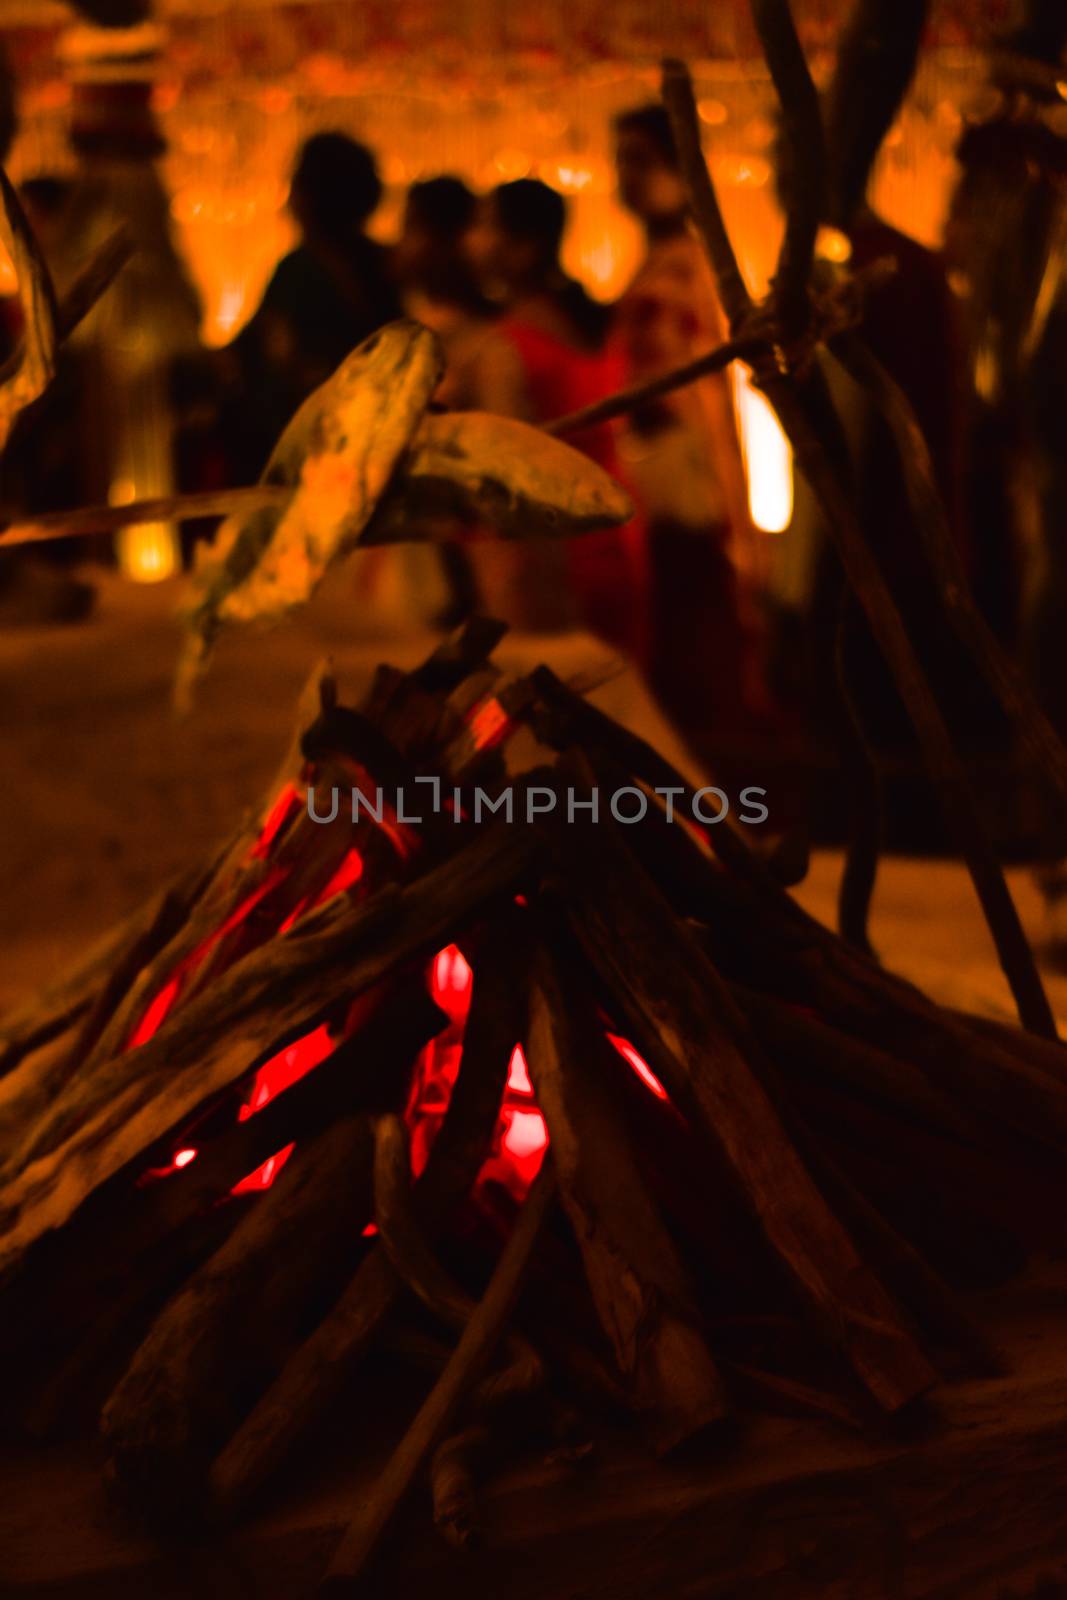 KOLKATA , INDIA SEPTEMBER 26, 2017 - Decorated art and craft decoration of artificial fireplace with flames made of wood timer and charcoal showing ancient life style in a famous Durga Puja pandal. by sudiptabhowmick